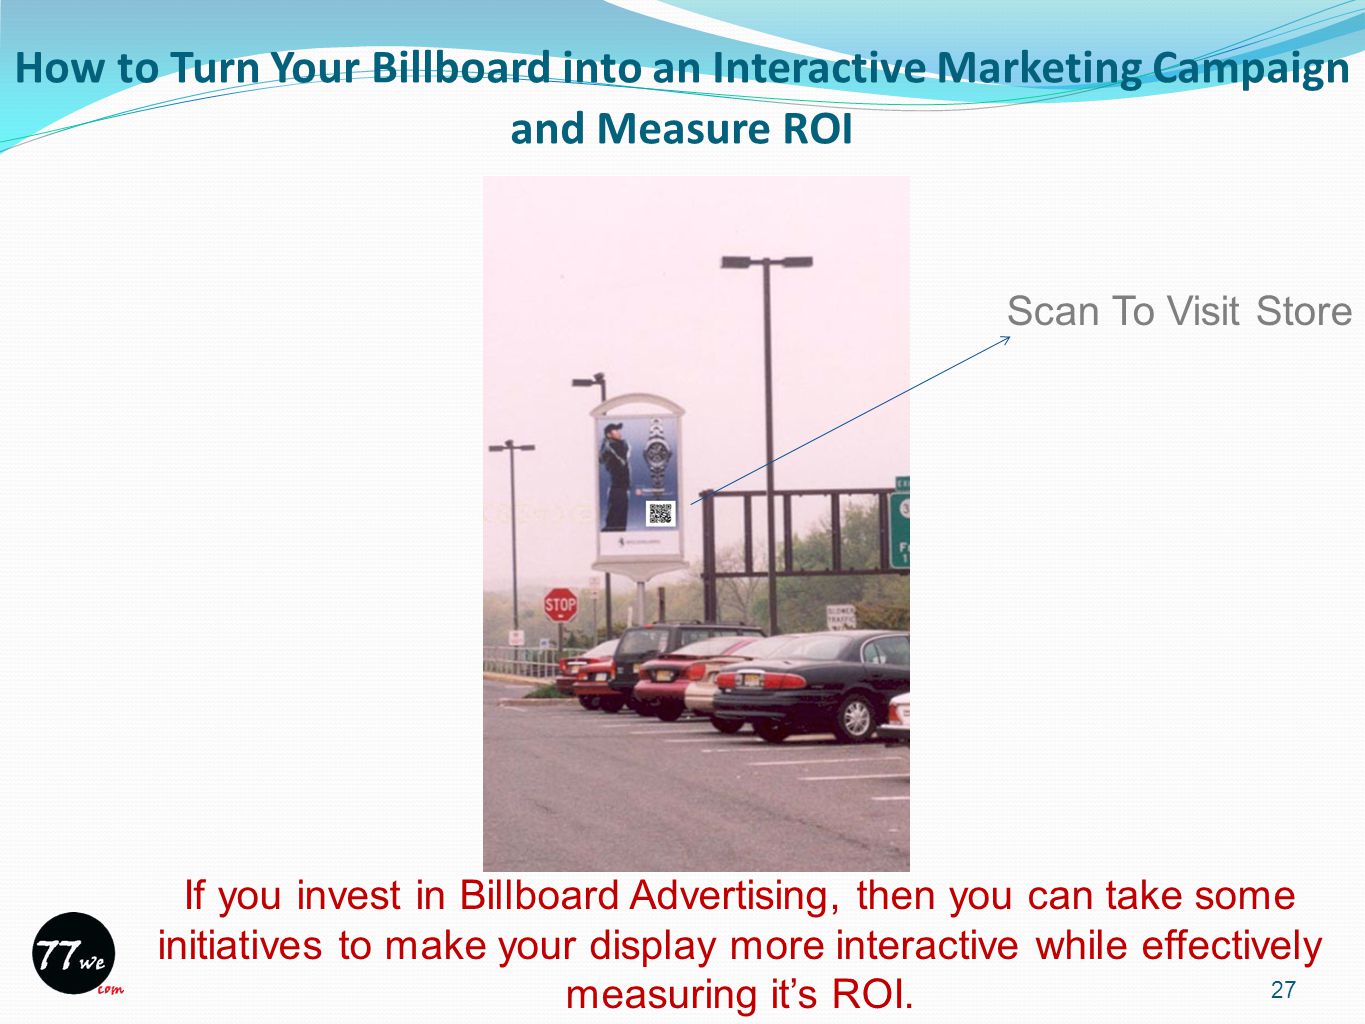 How to Turn Your Billboard into an Interactive Marketing Campaign and Measure ROI 27 If you invest in Billboard Advertising, then you can take some initiatives to make your display more interactive while effectively measuring it’s ROI.